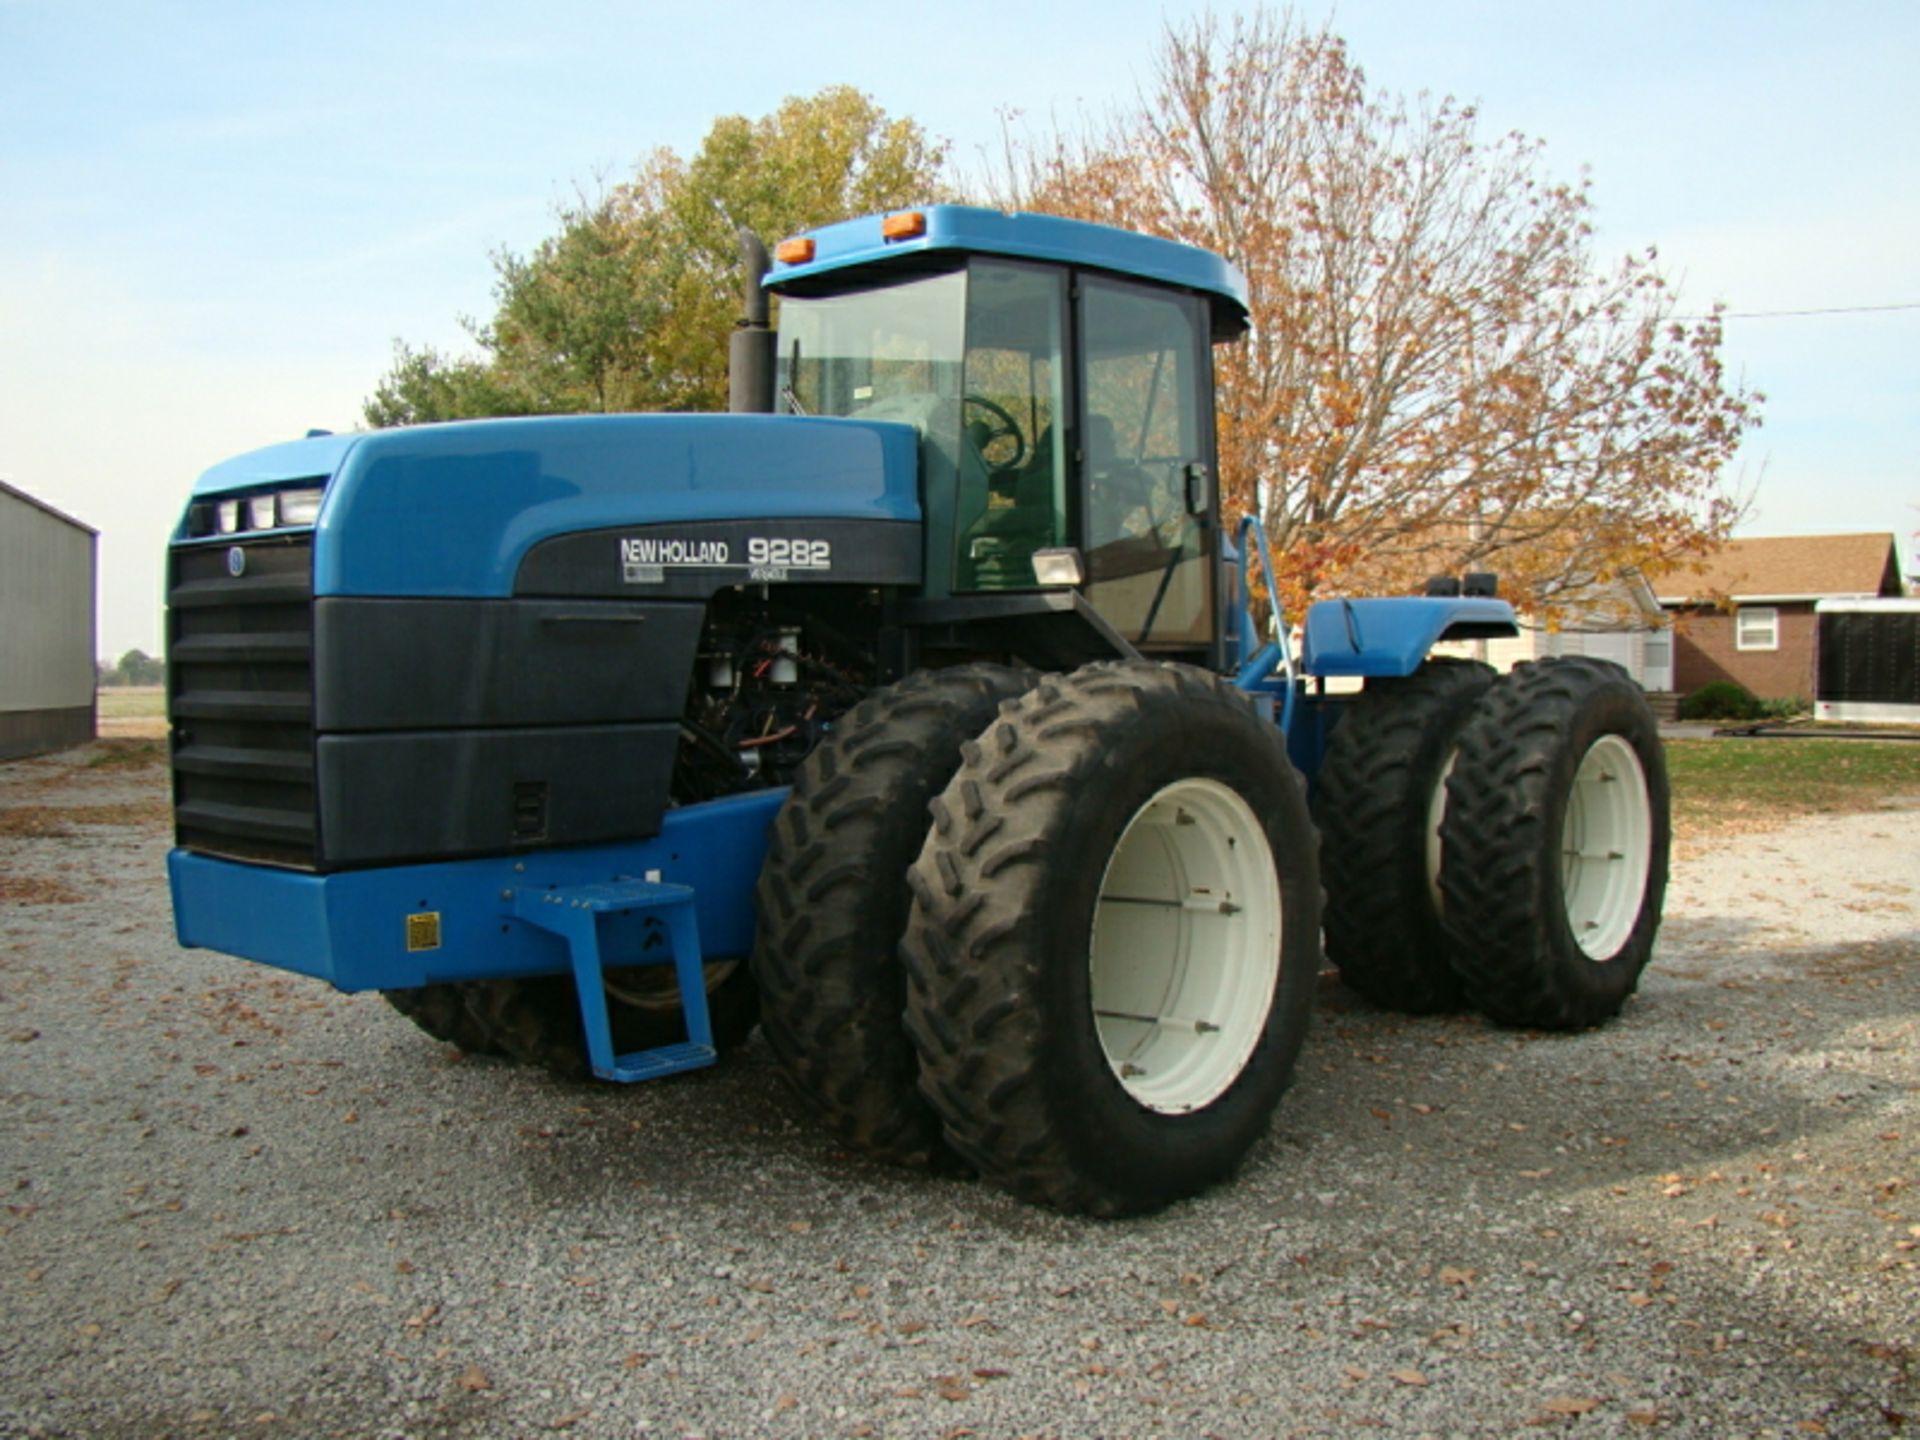 1996 New Holland 9282 tractor, 4x4, 3,515 hours, 5.9 Cummins, Good Year 18.4-38 duals 50%, - Image 14 of 26